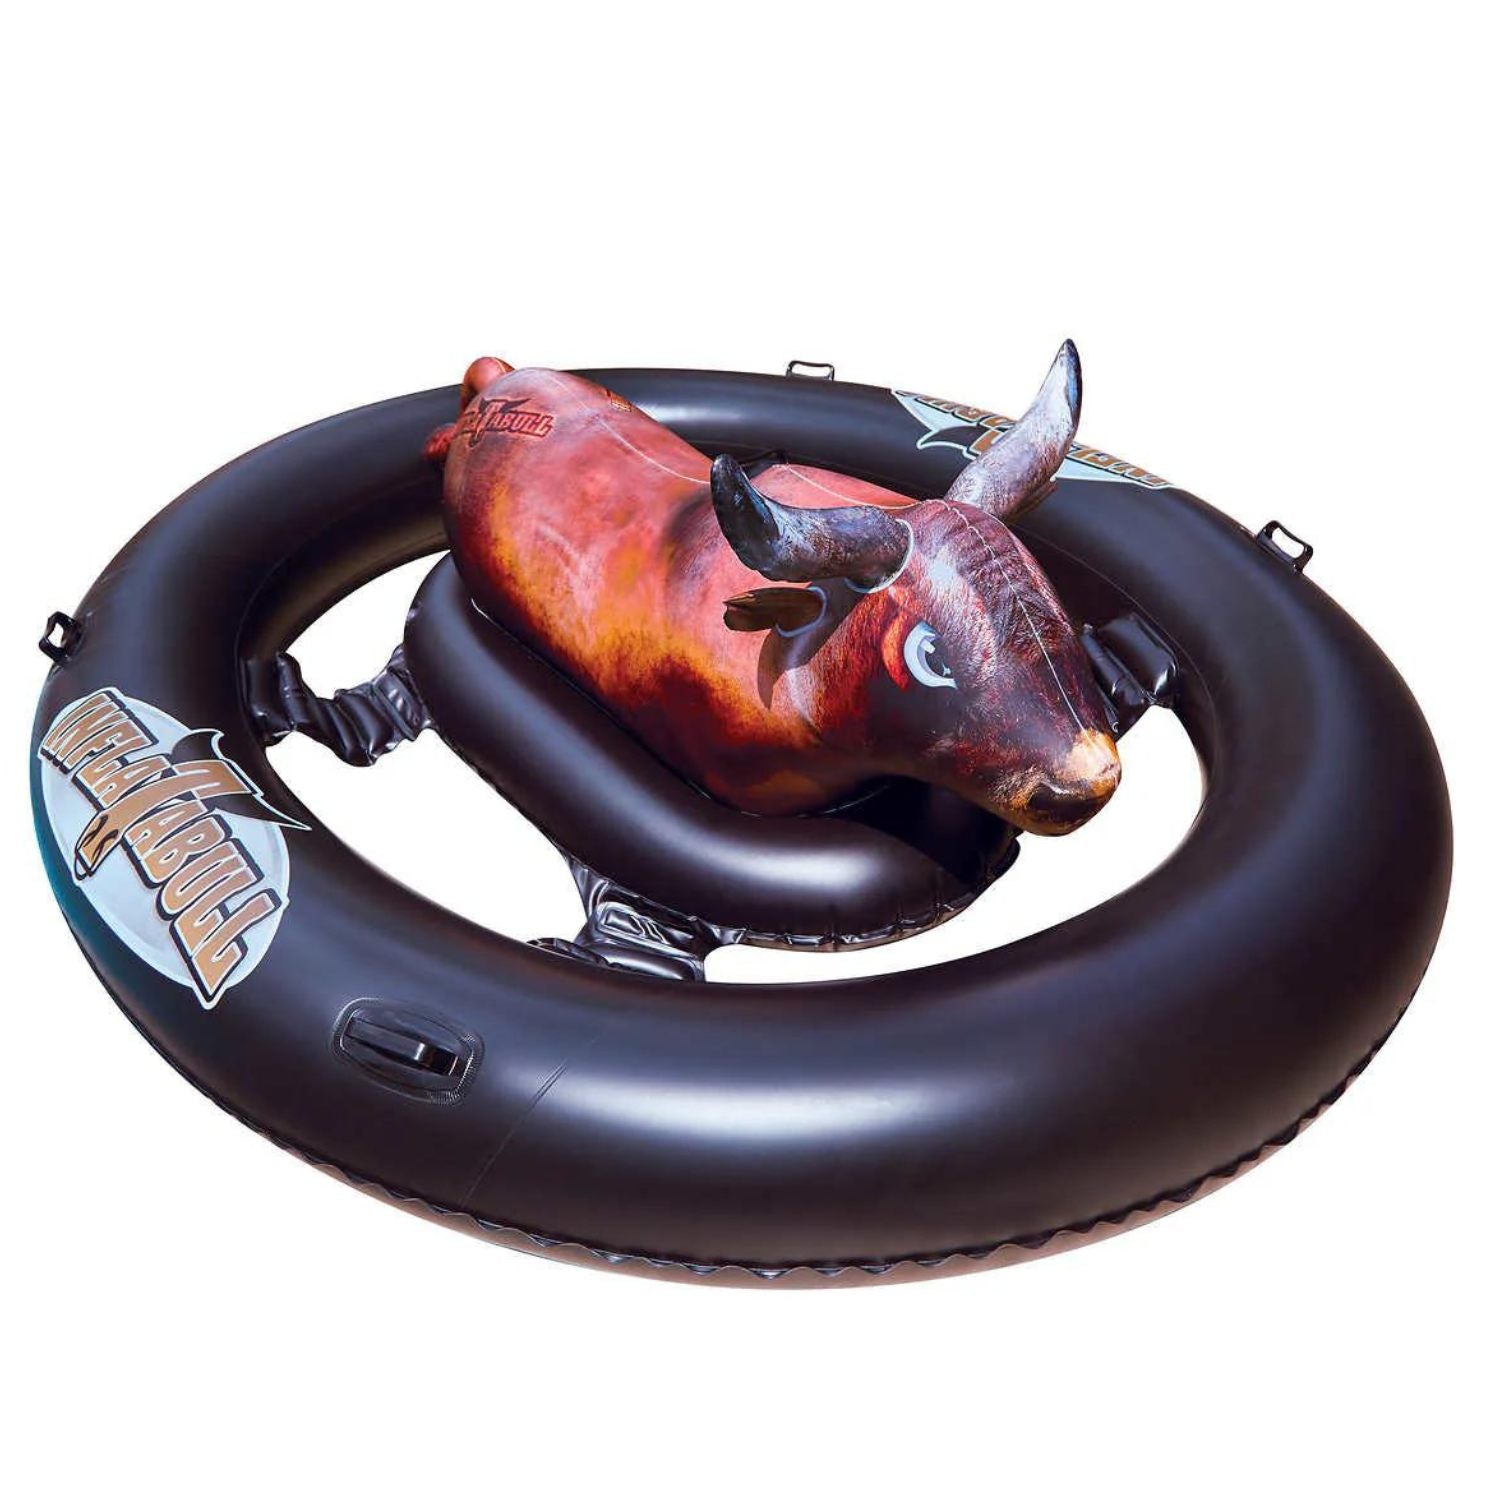 Inflatabull Taureau gonflable a enfourcher